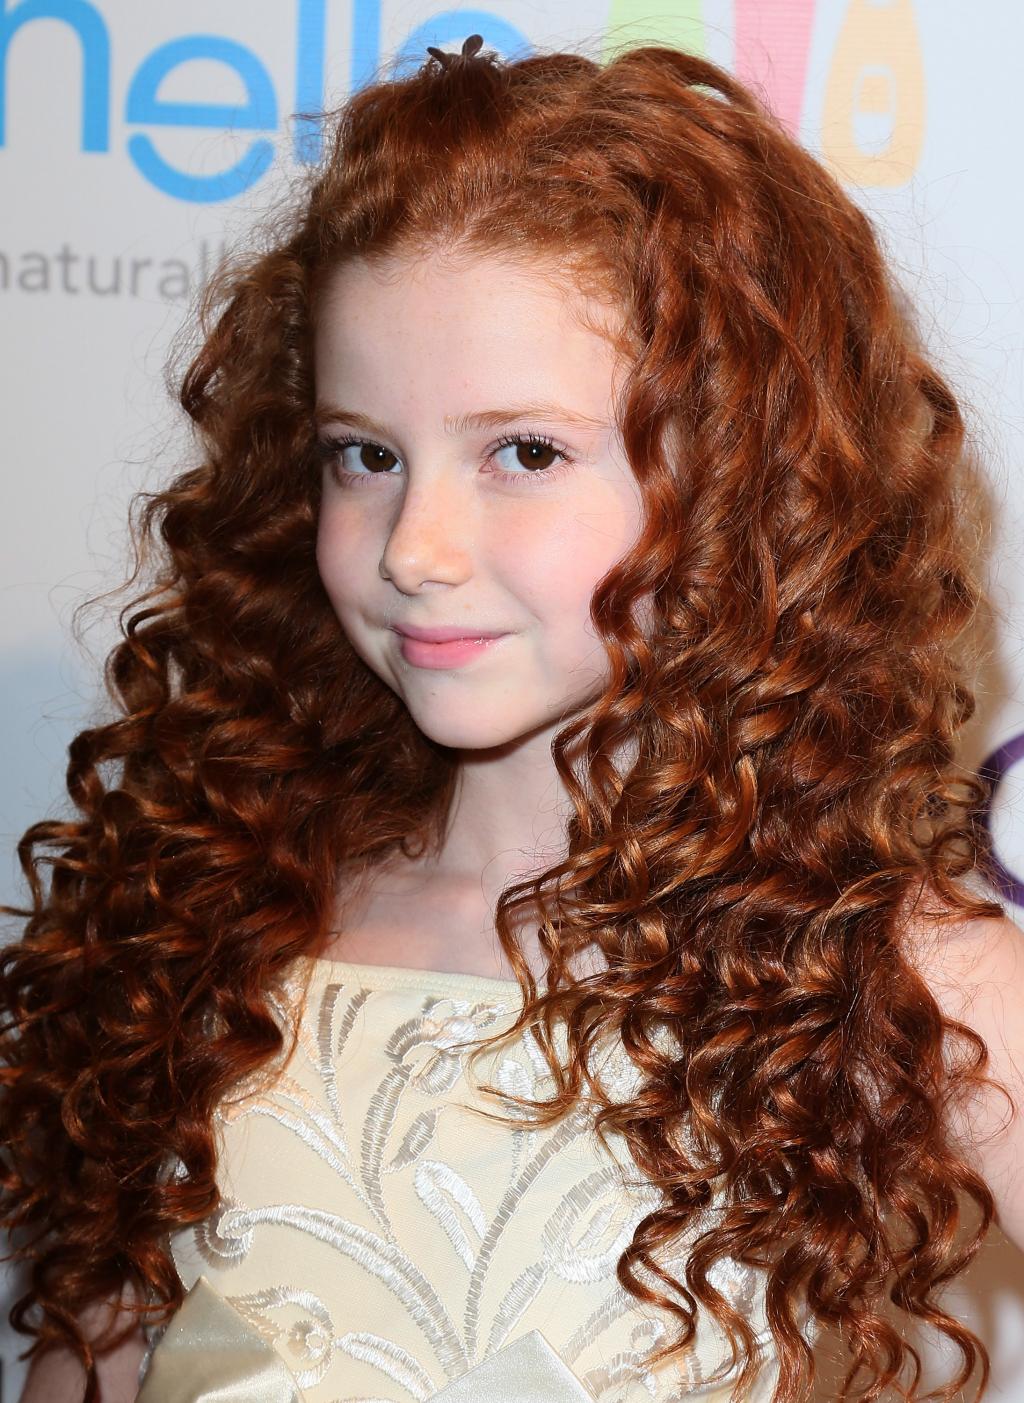 Francesca Capaldi's Curly Hair Styling Tips: "Dog With A Blog